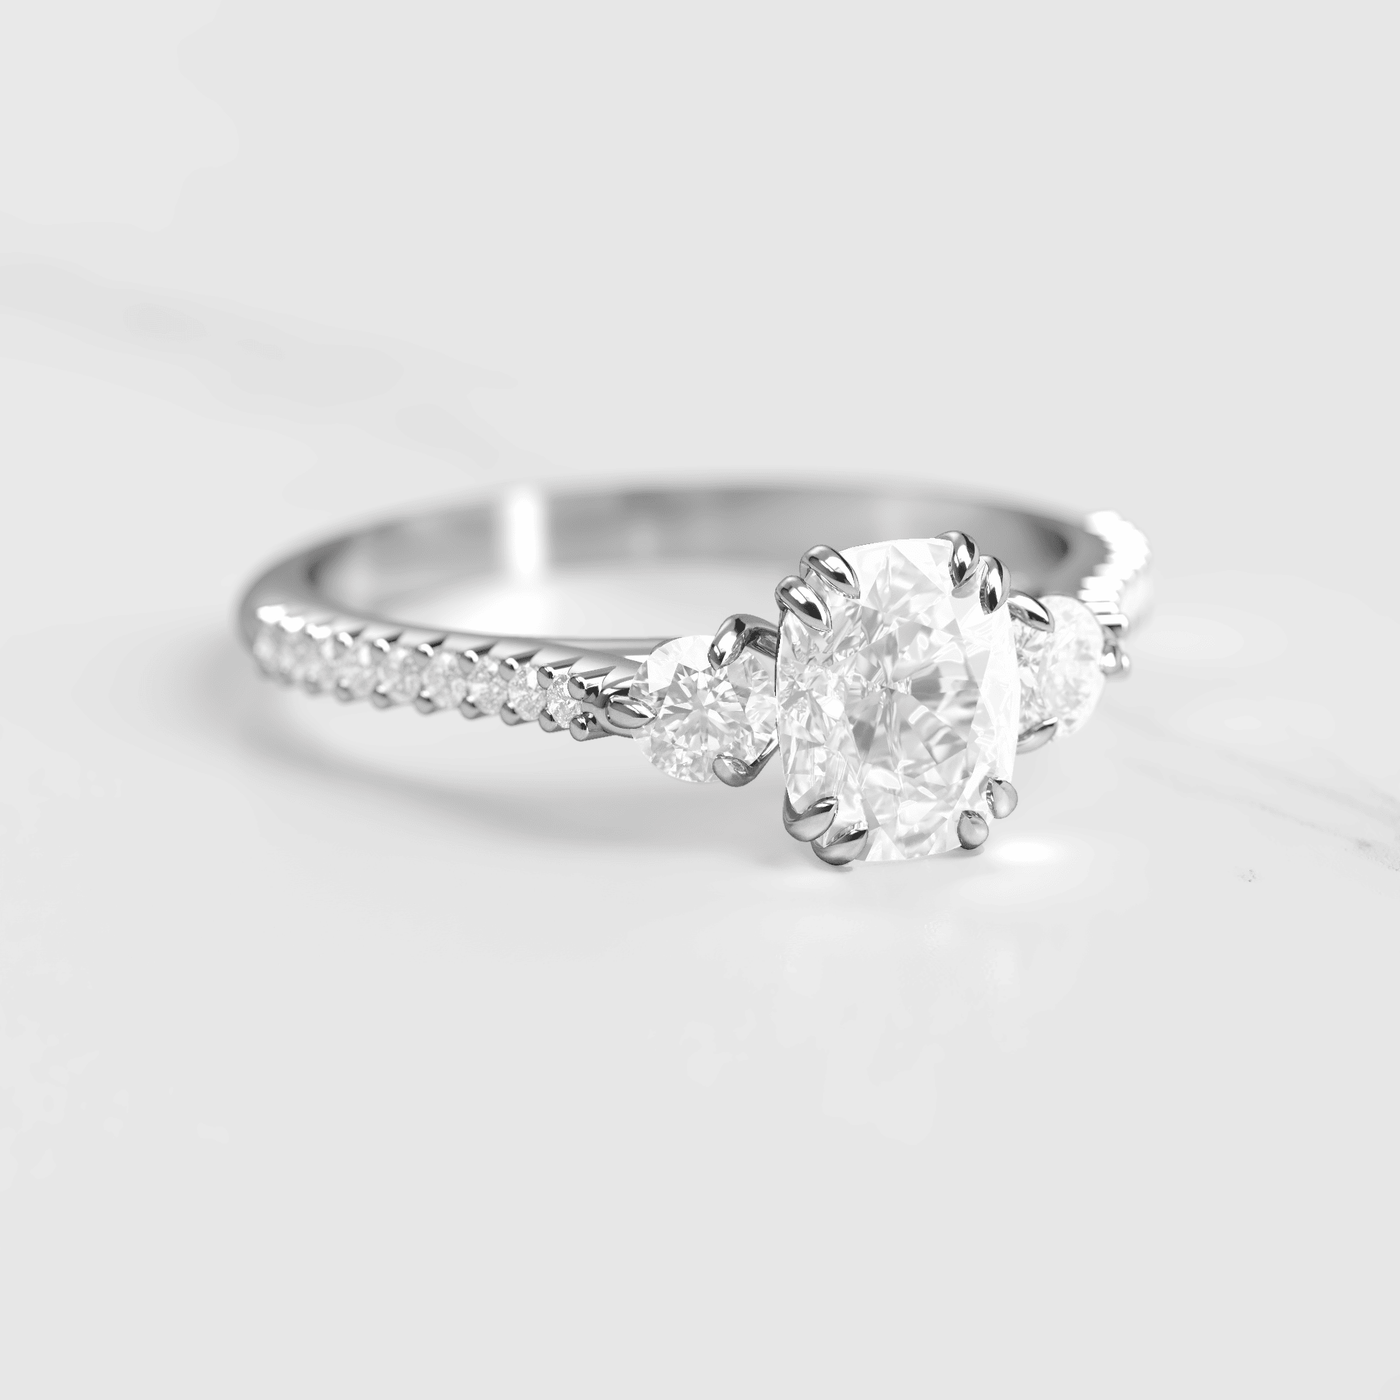 Cushion-Cut White Diamond with 2 Side Diamonds and Half Pave Gold Ring